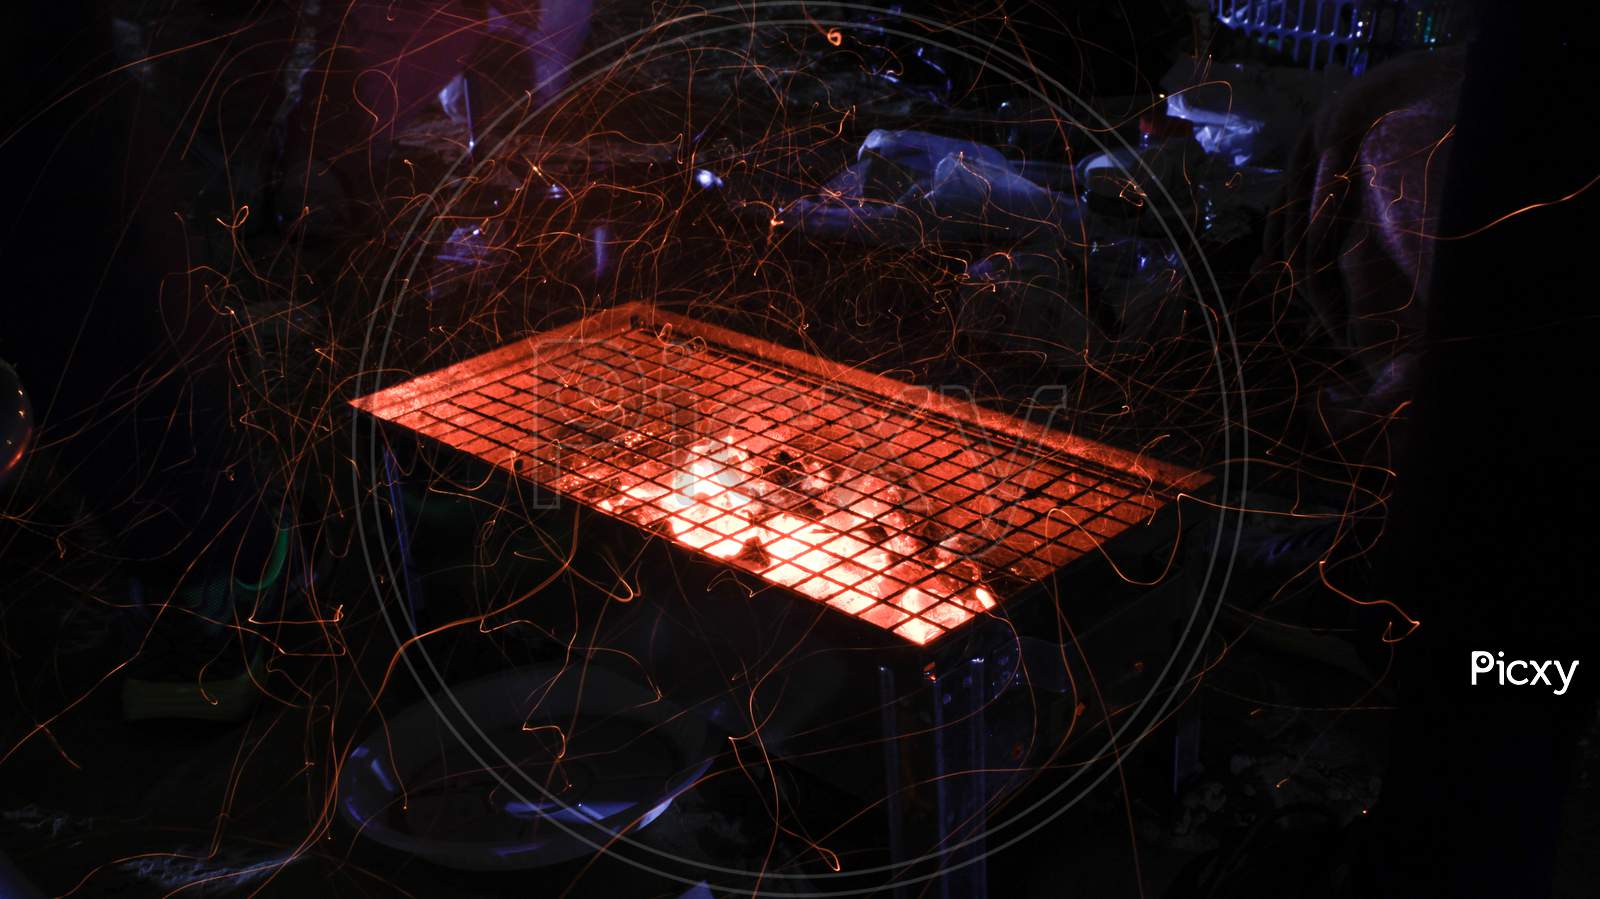 Hot Flaming Coal Burning In A Grill At A Barbeque Making Sparks, Long Exposure Light Trails Photo